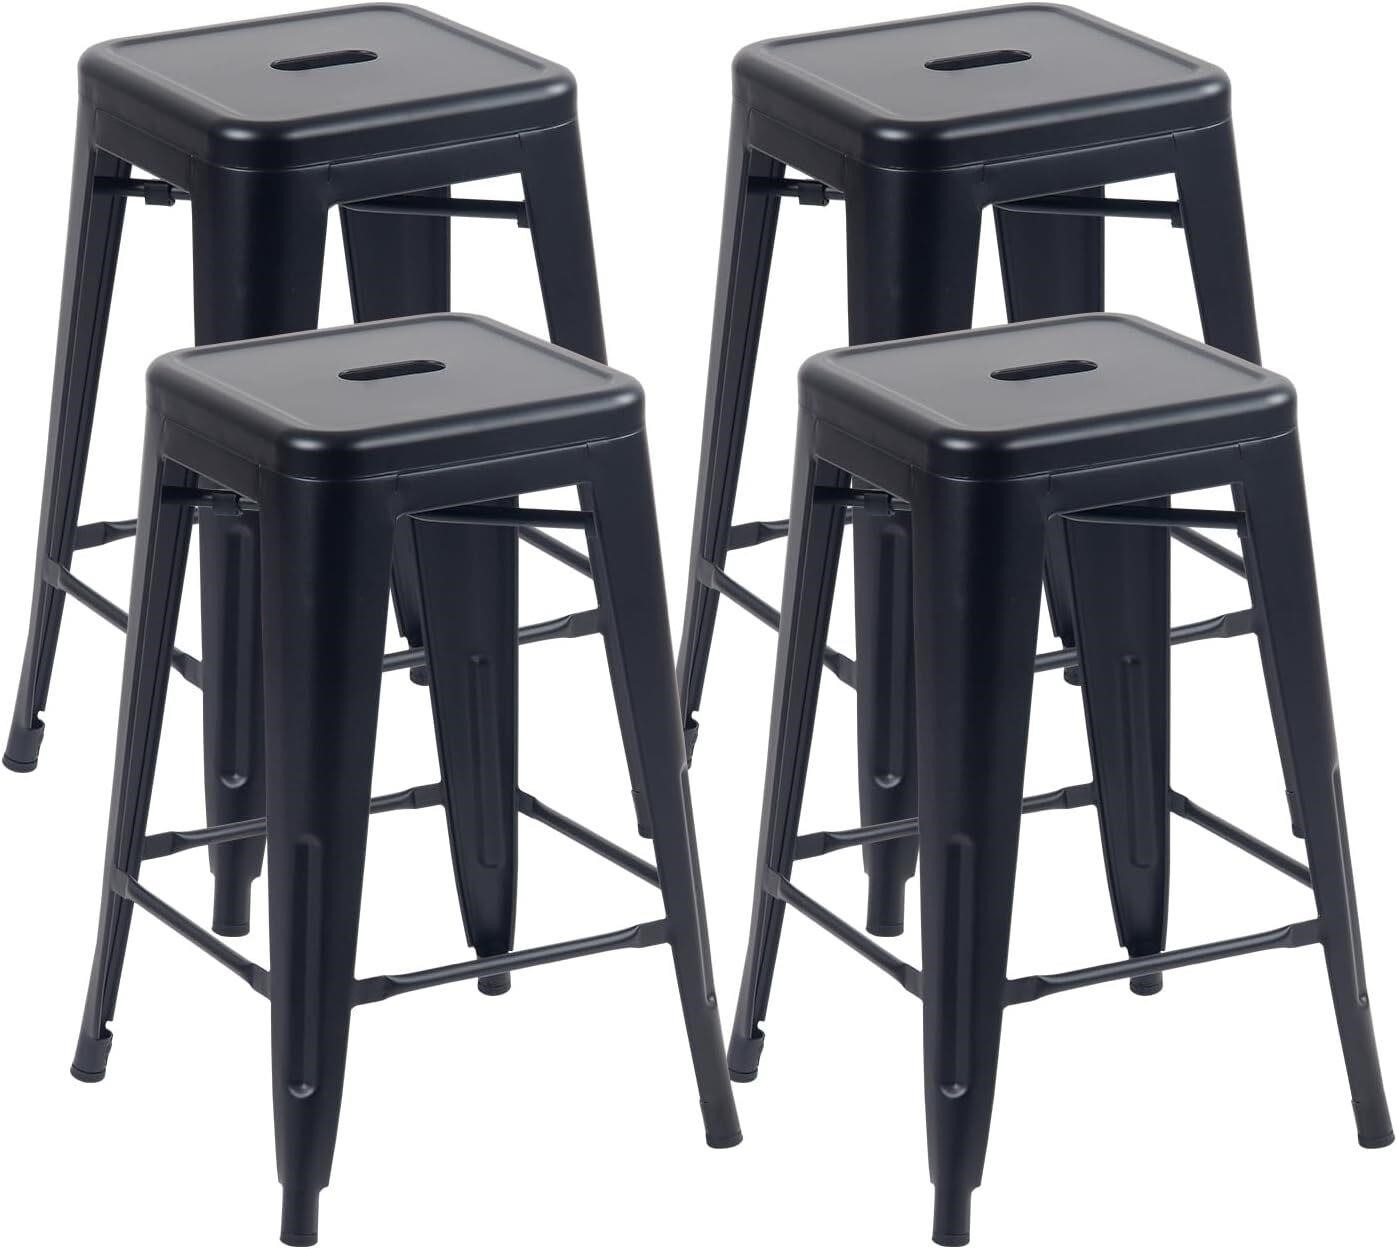 YOUNIKE Metal Barstools Set of 4 - 24 Inches